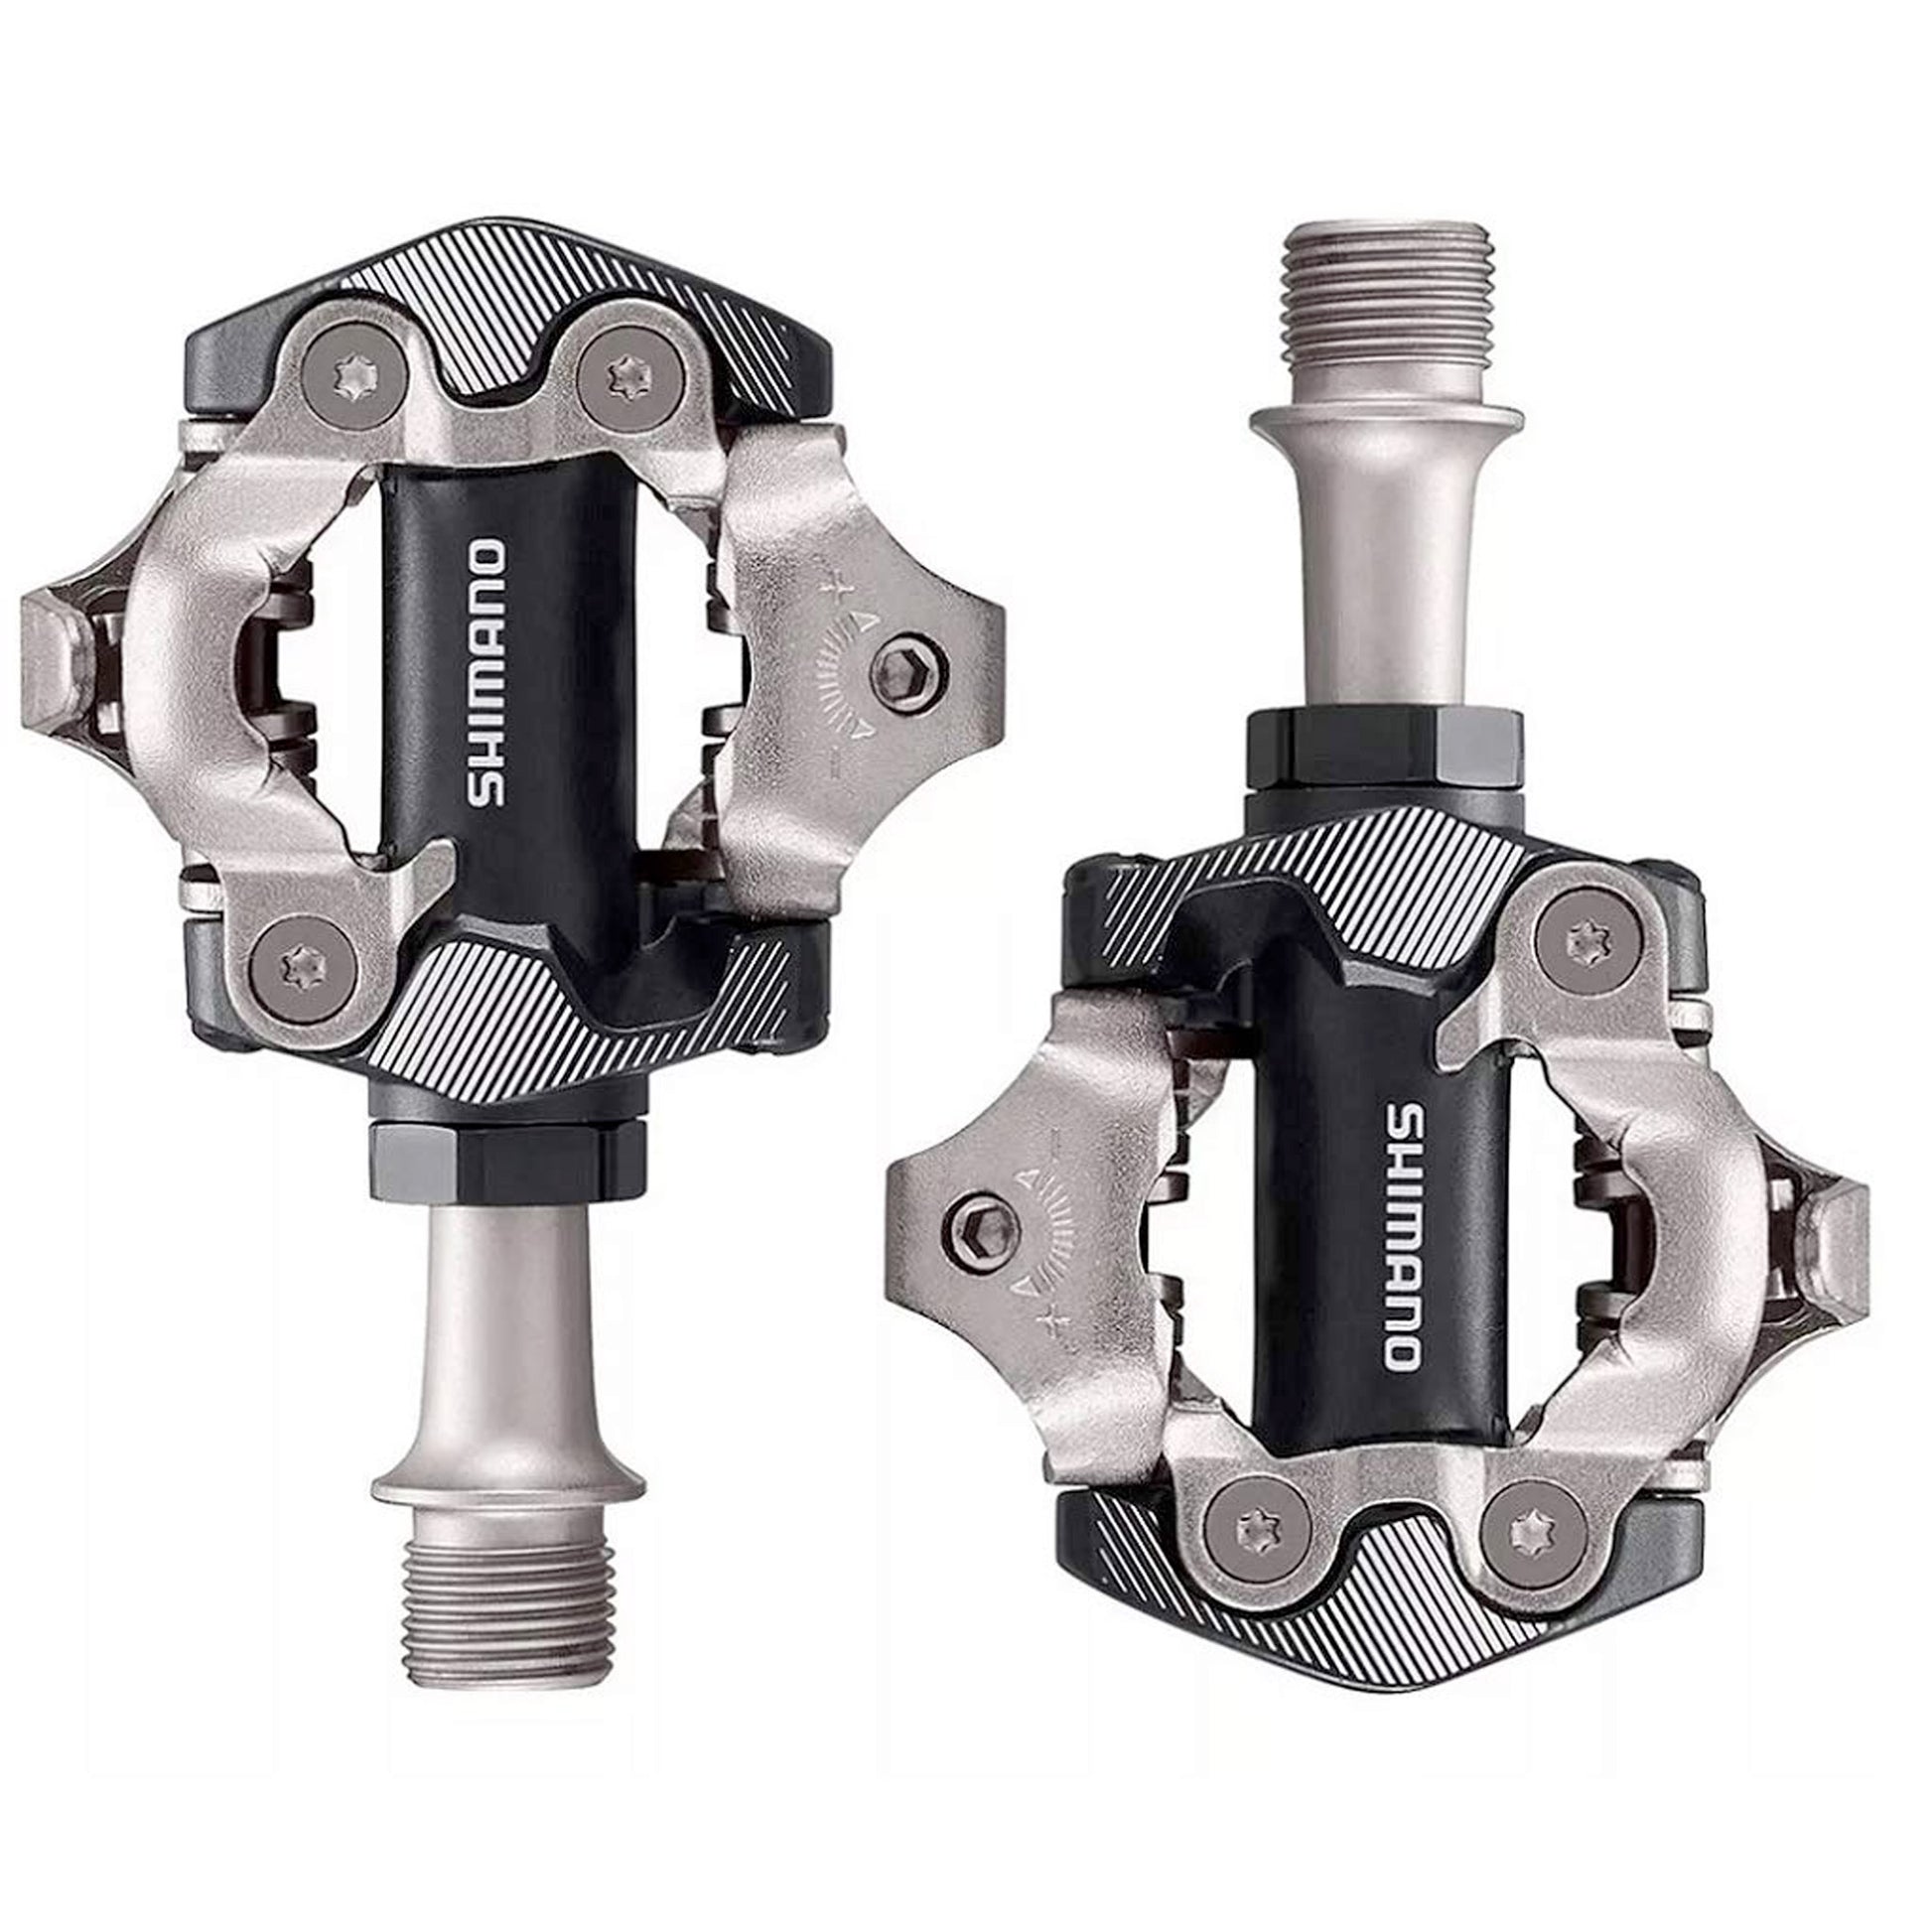 Shimano PD-M8100 SPD Deore XT Pedals buy online at Woolys Wheels Sydney